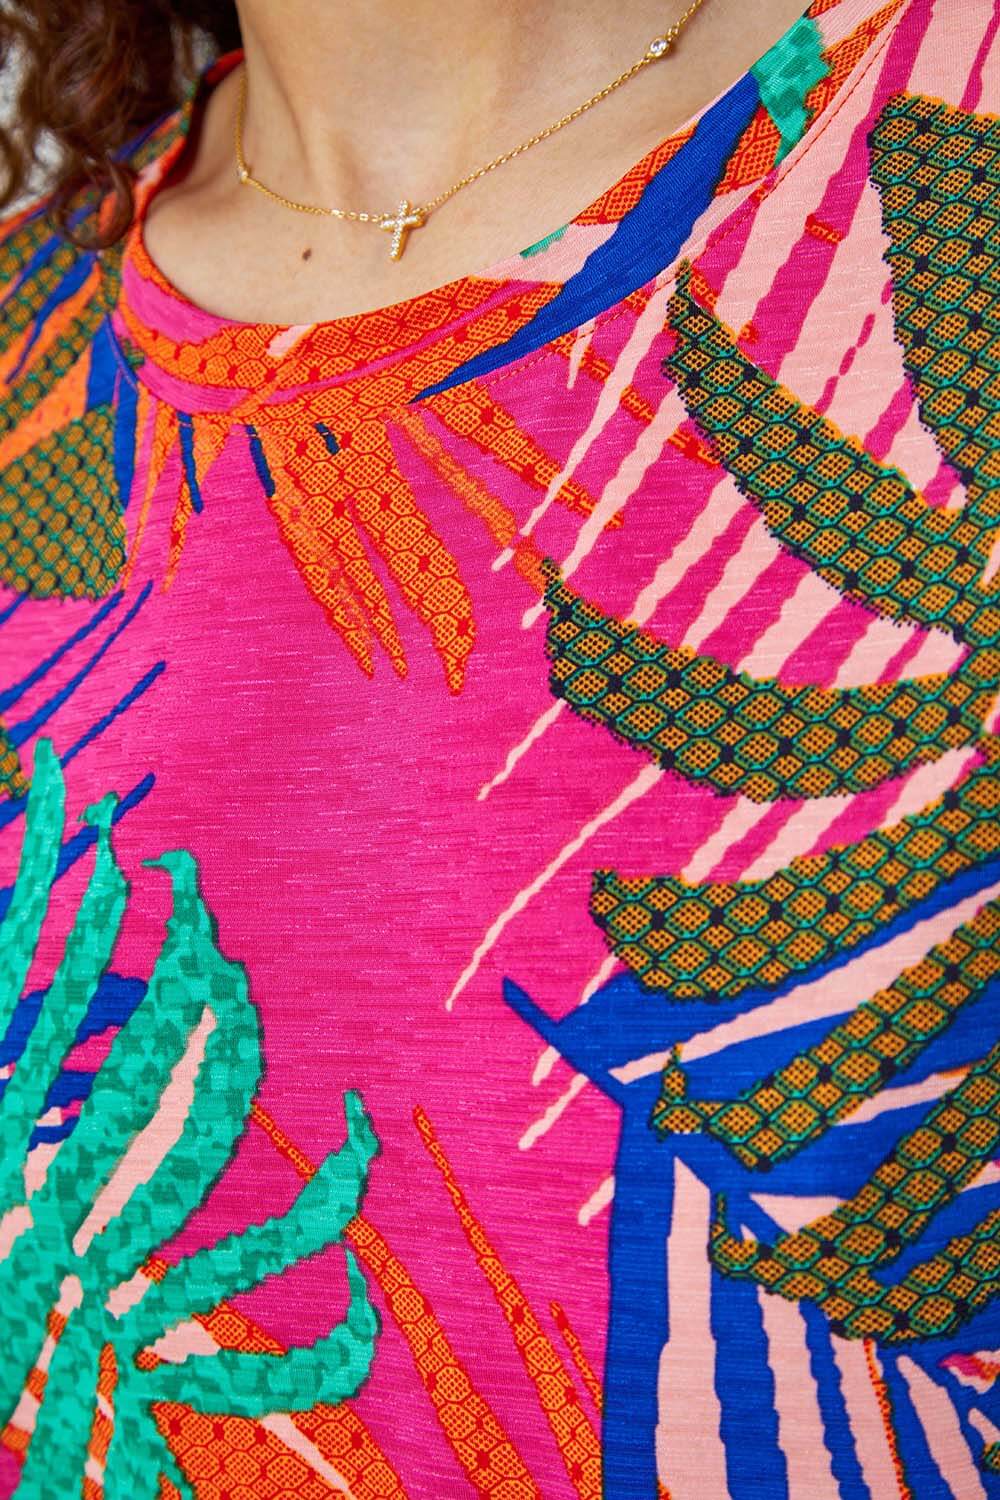 PINK Tropical Print Cocoon Stretch Top, Image 5 of 5